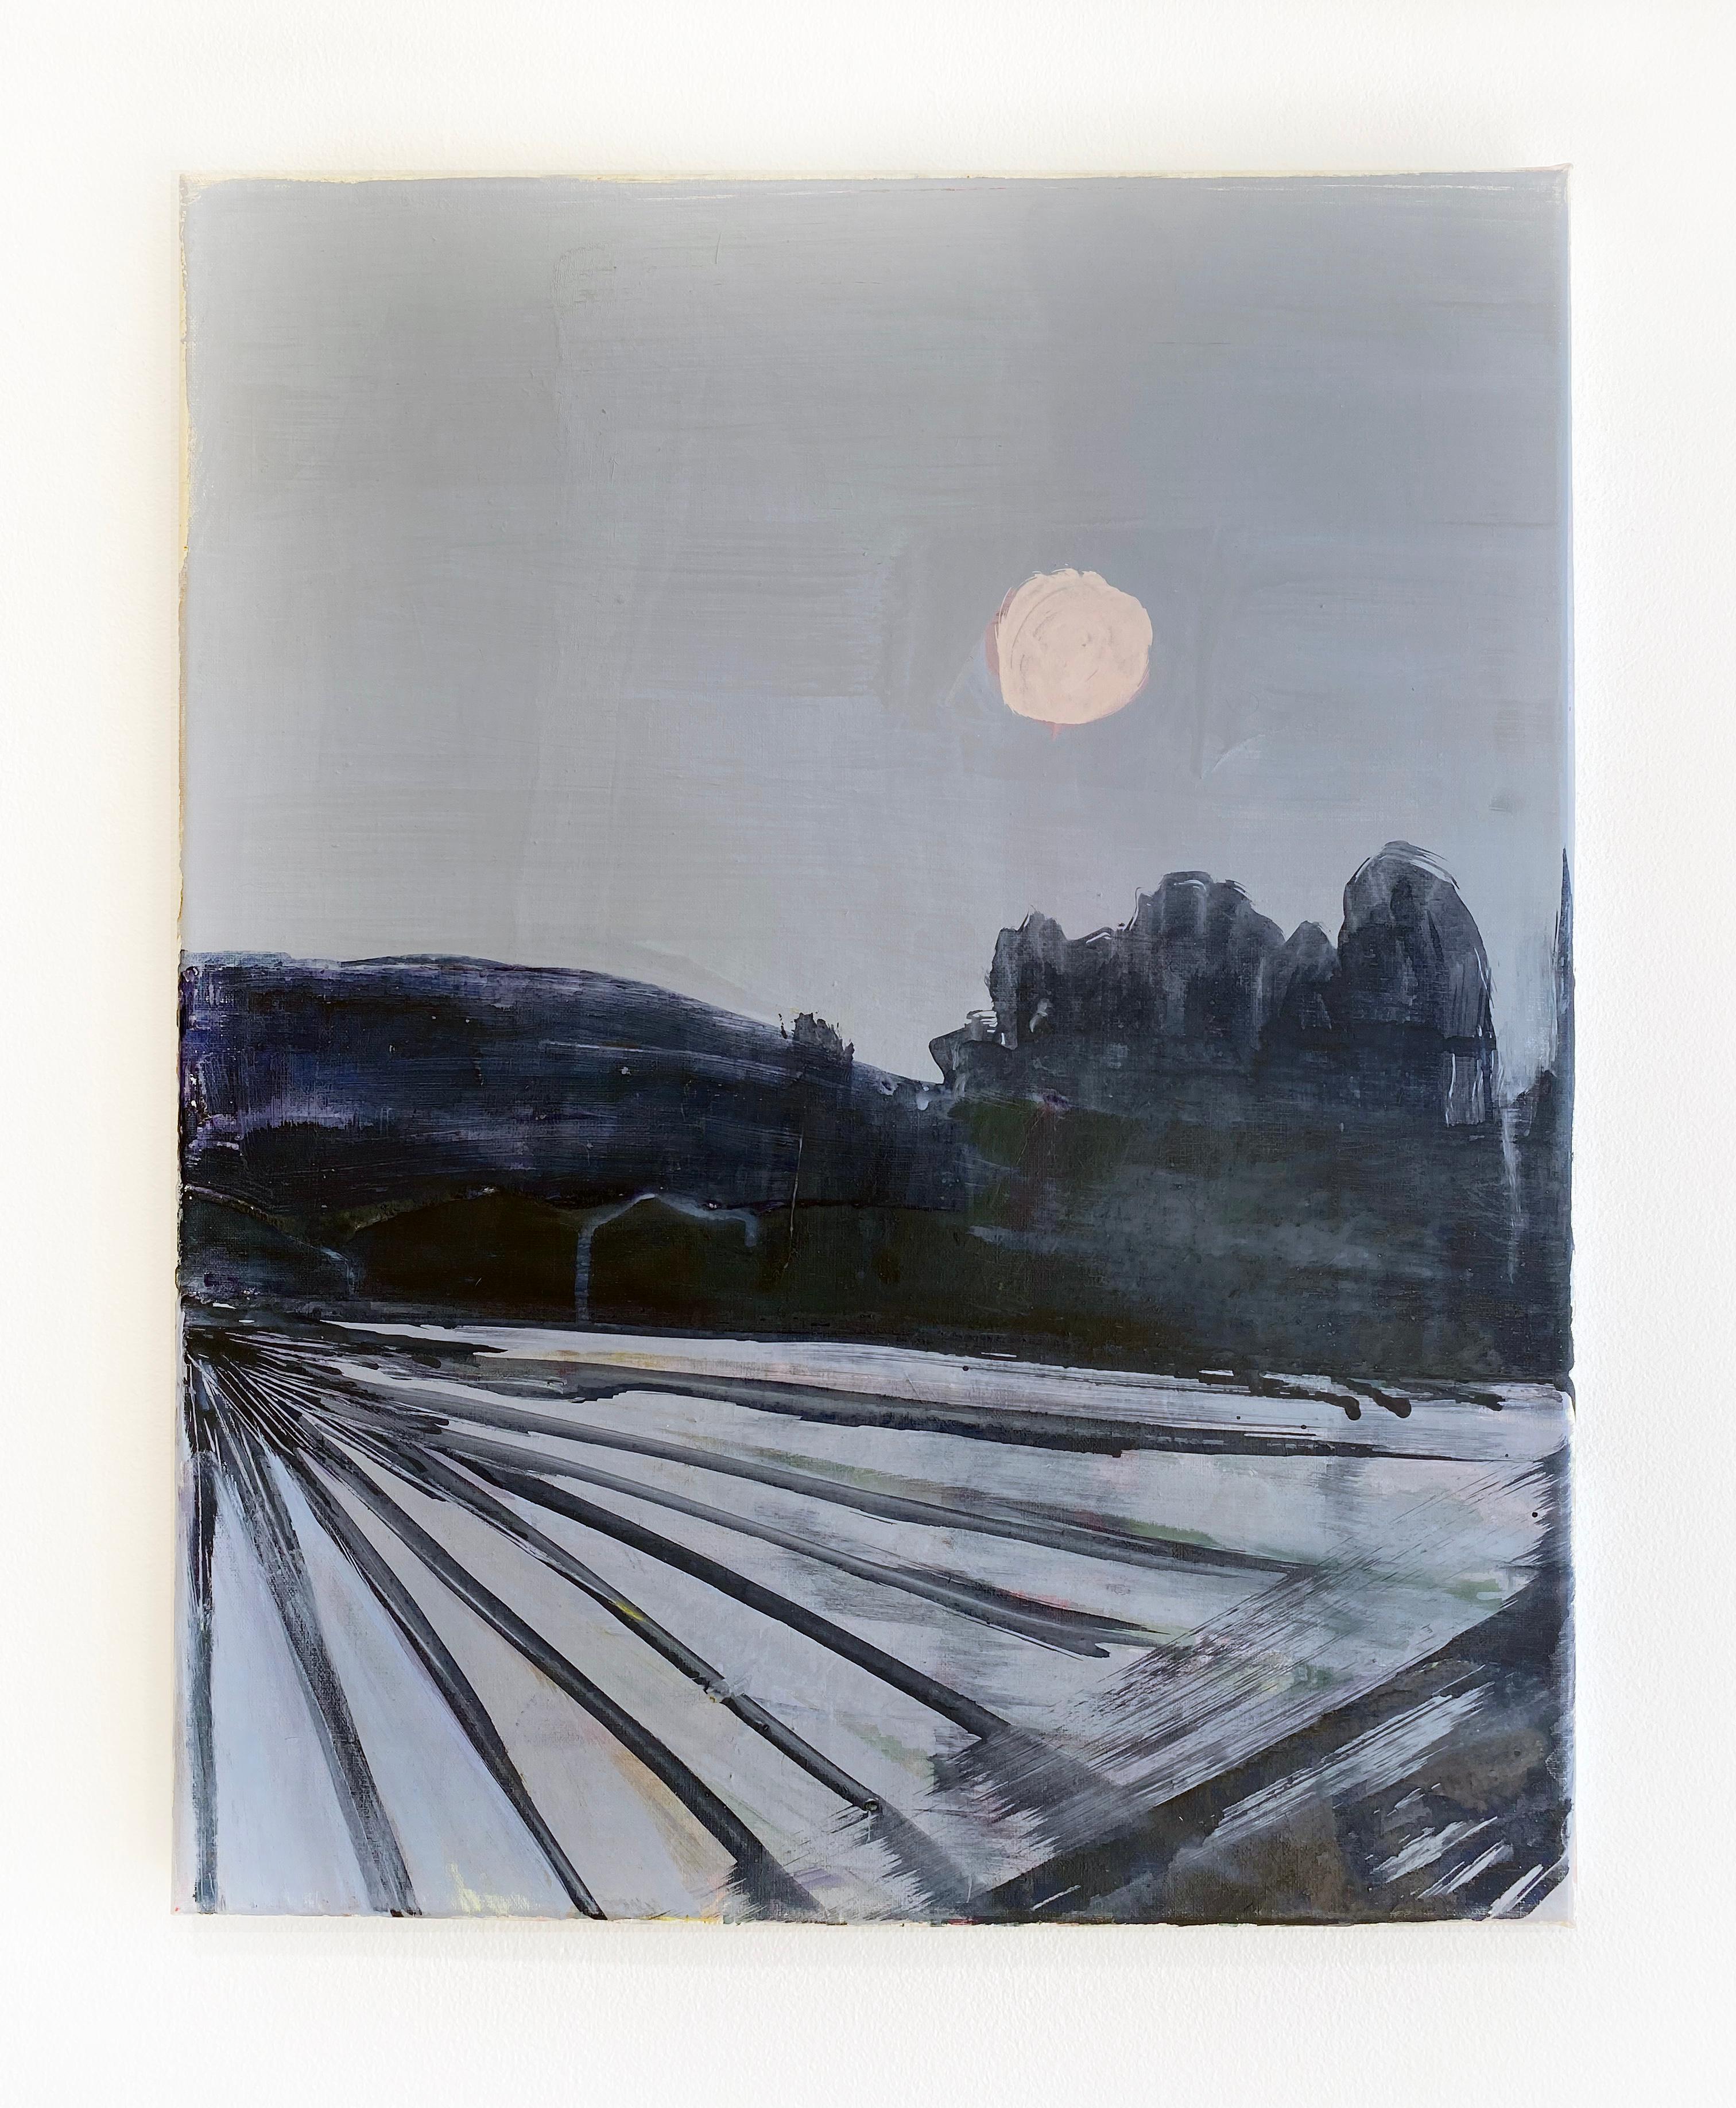 'Night Field' 2020 by Katharine Dufault. Oil on linen, 20 x 16 inches. Dufault’s unique yet familiar landscapes spark curiosity, expressed through thick, delicate brush strokes, and wiped or poured paint, resulting in opaque and translucent areas in